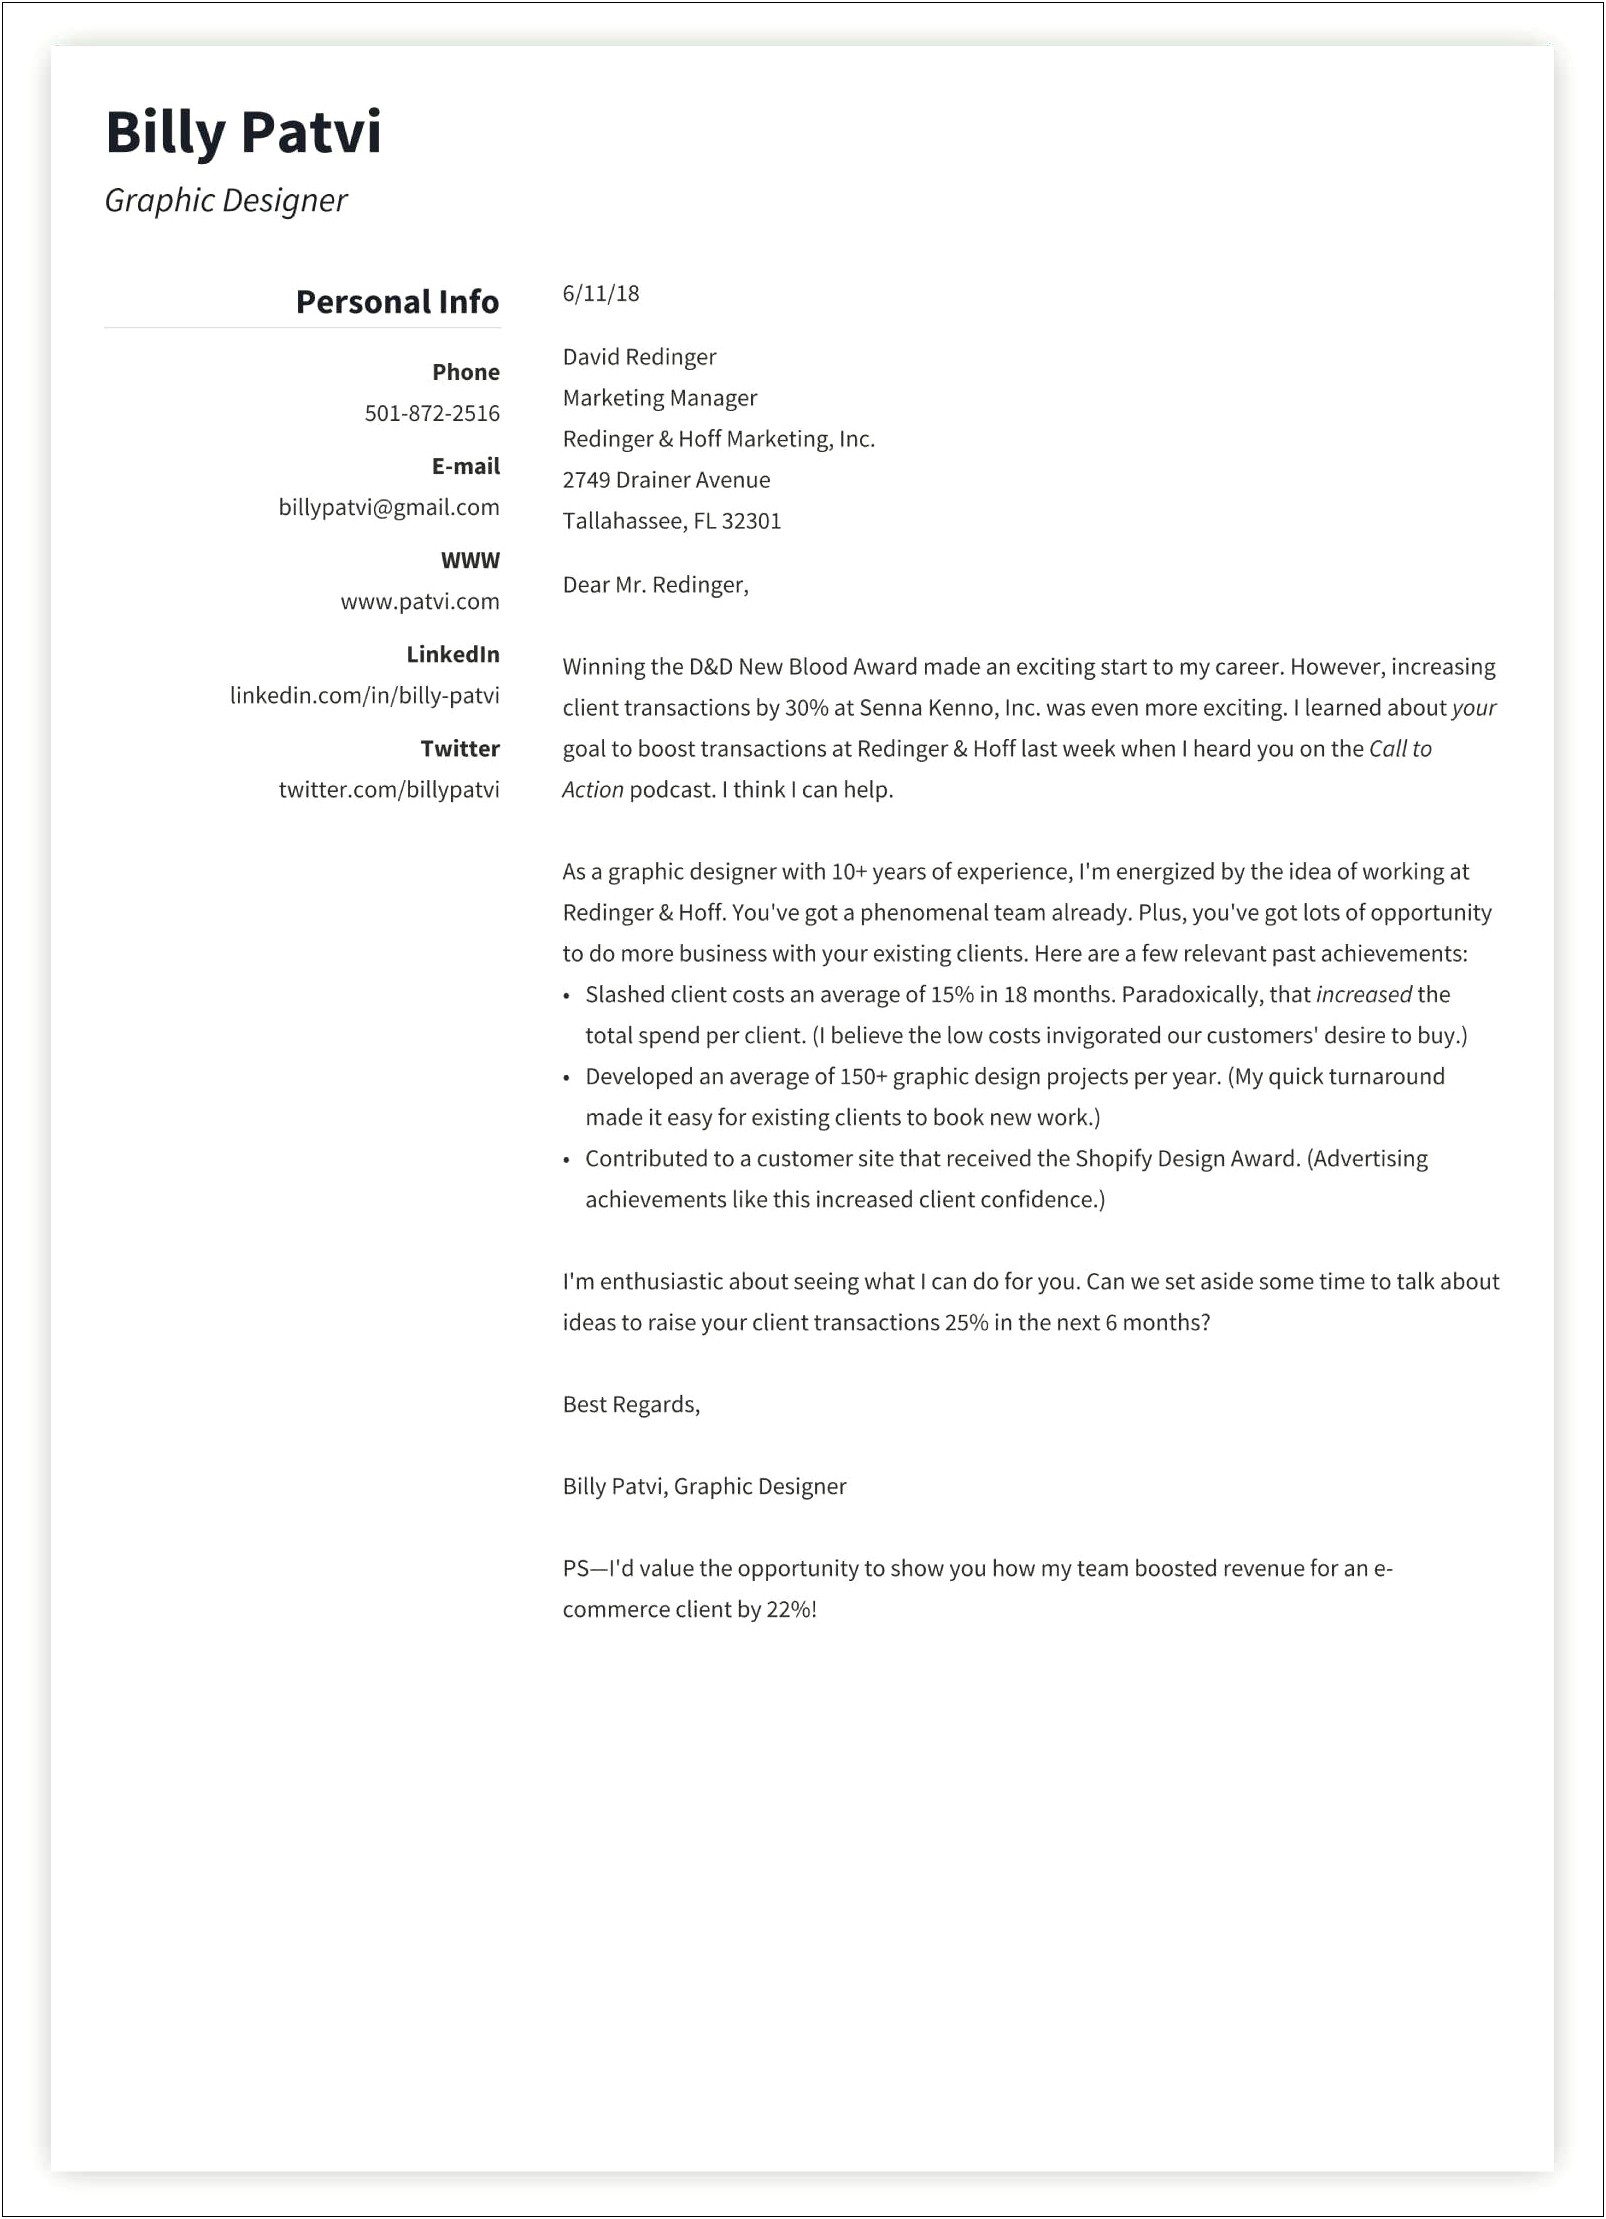 Cover Letter In Same Document As Resume